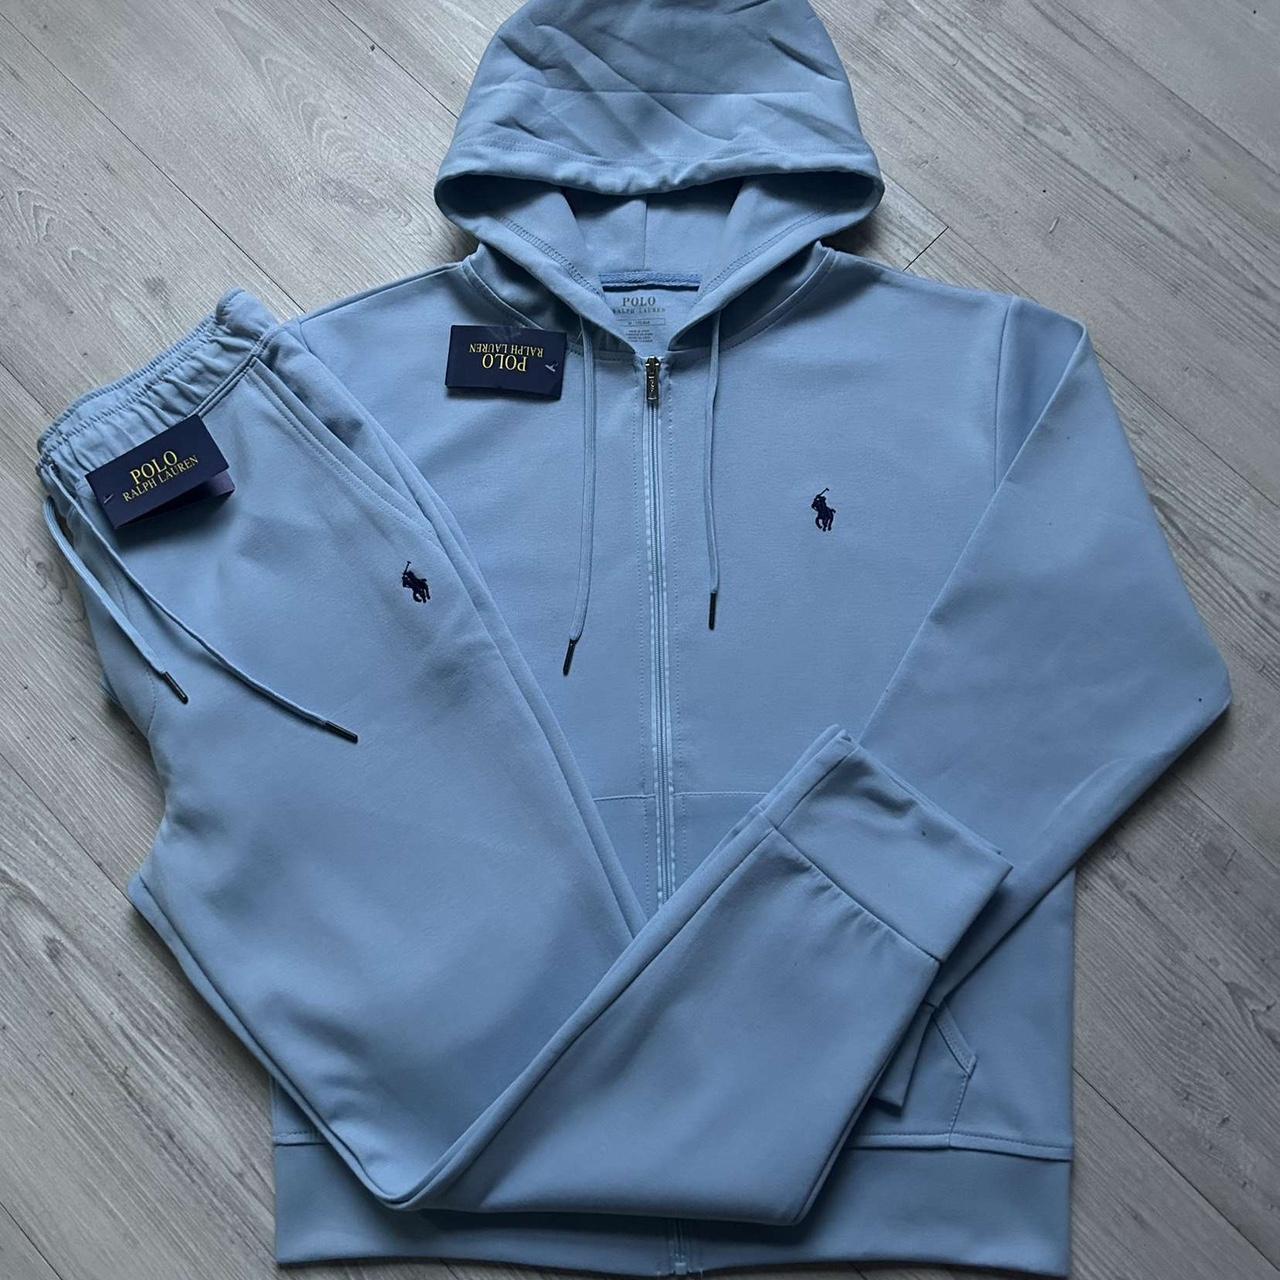 Ralph Lauren tracksuit brand new with tags included - Depop